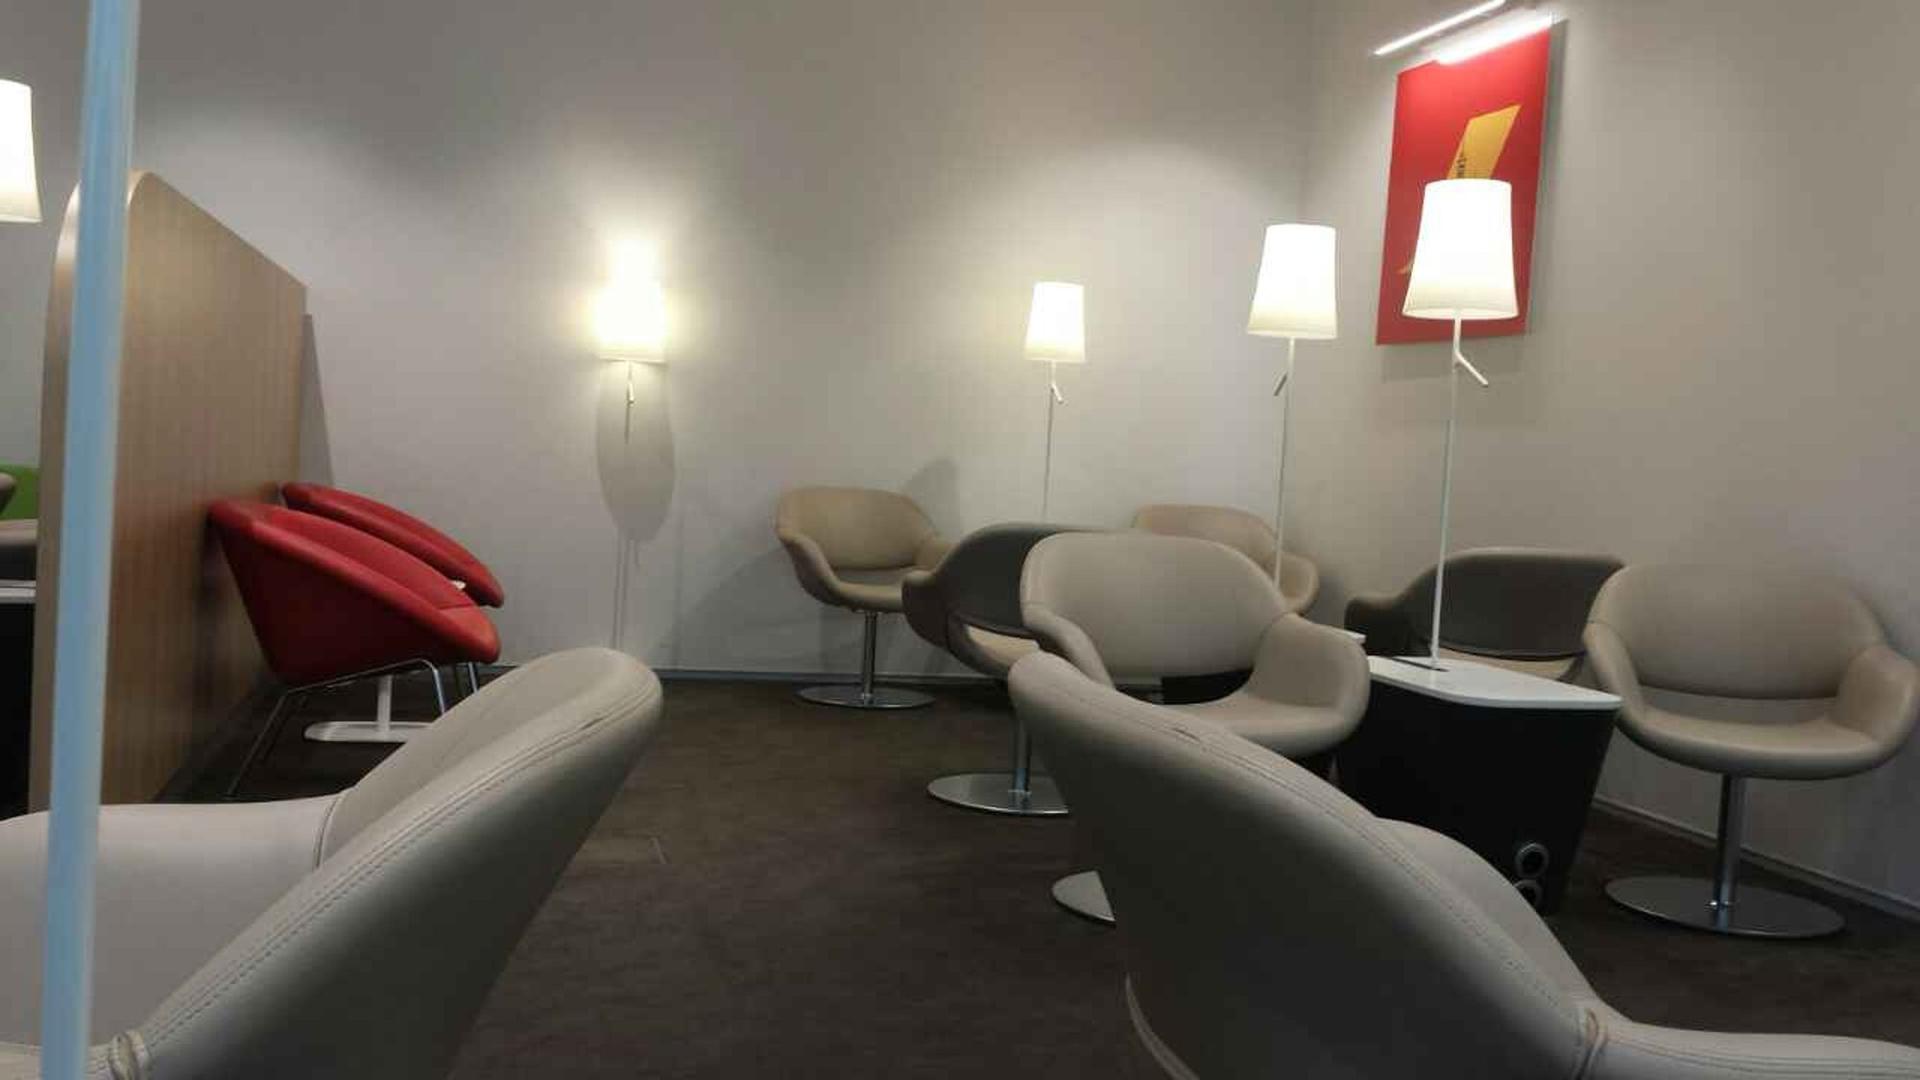 Air France Lounge image 1 of 3